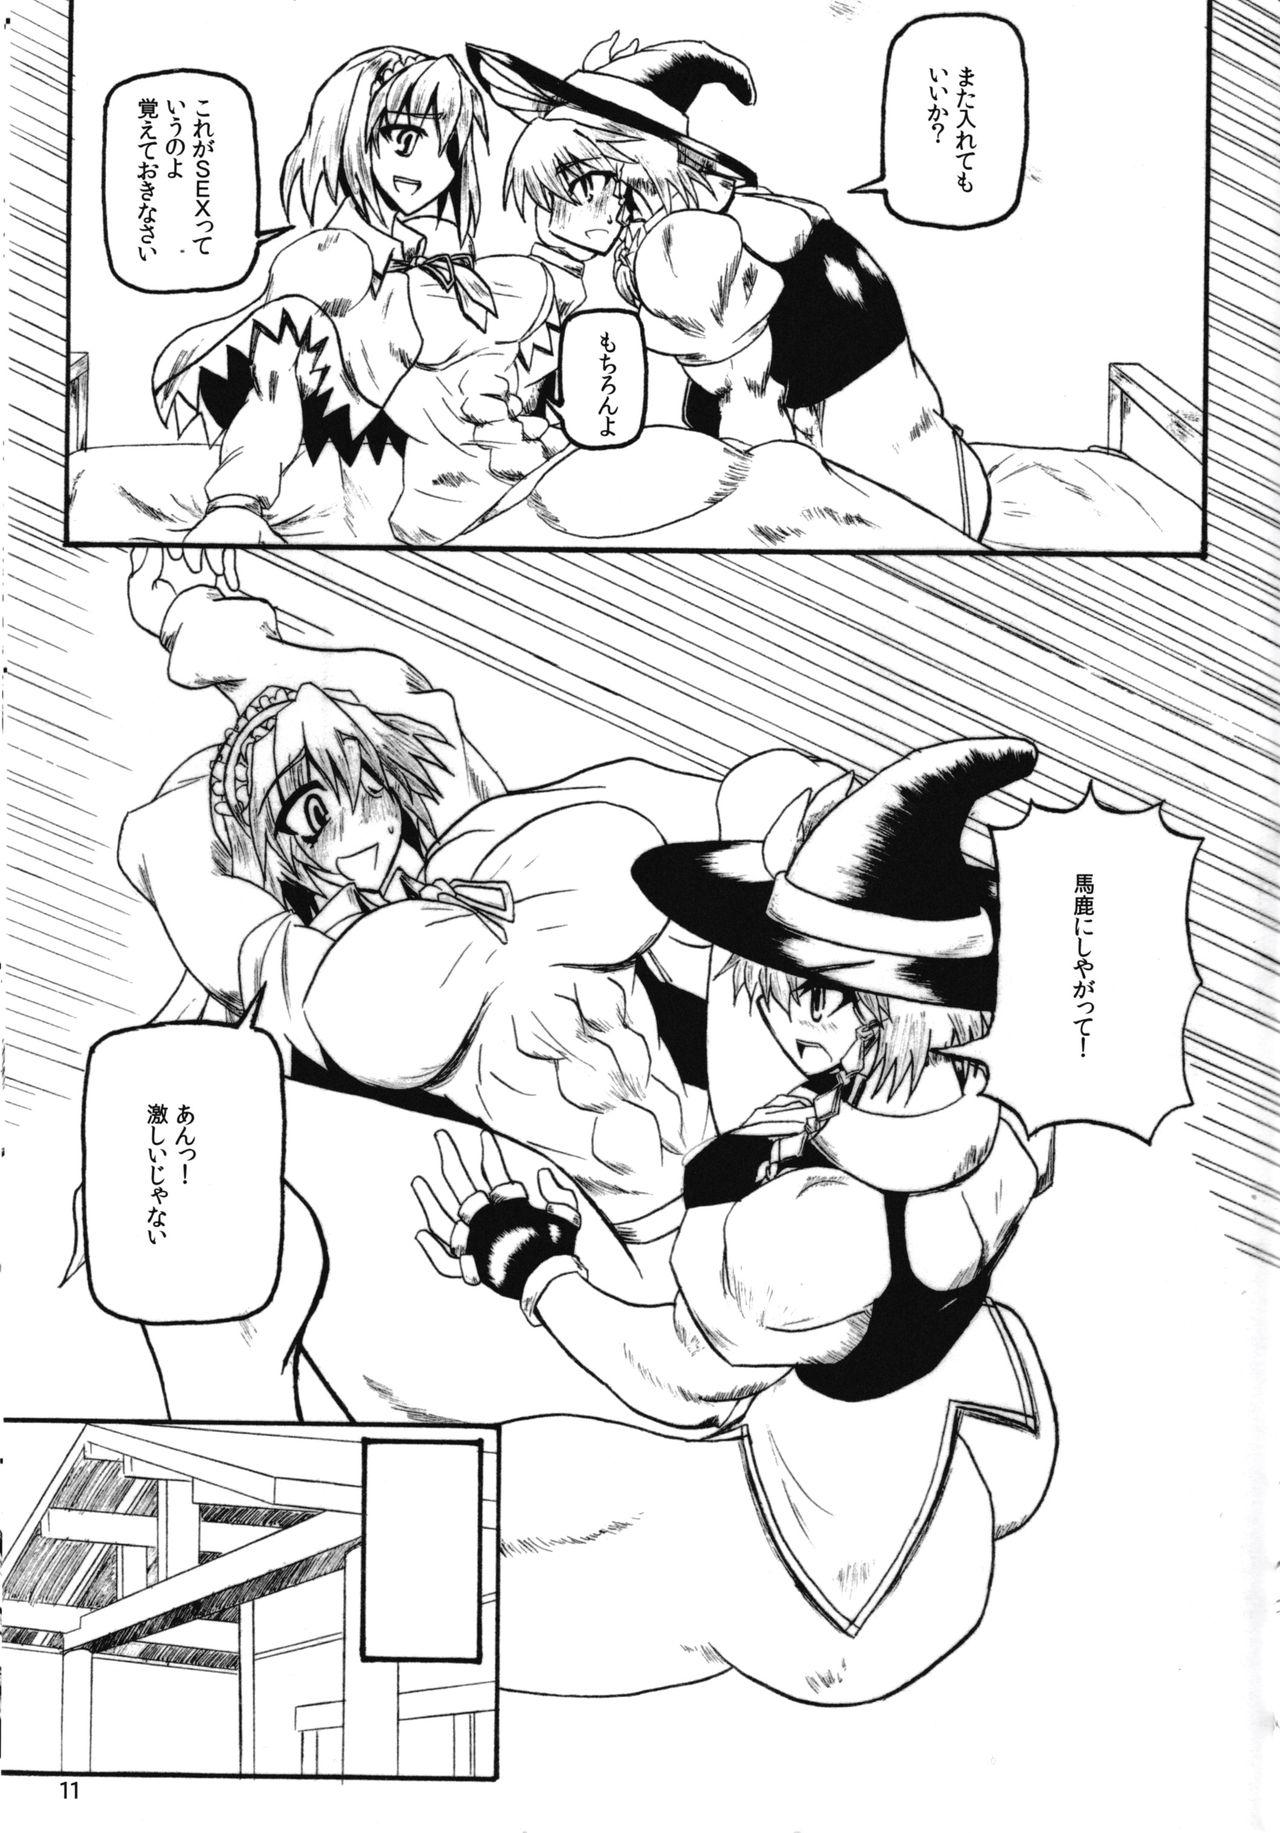 Concha Exceeds Power of Human2 - Touhou project Swinger - Page 11